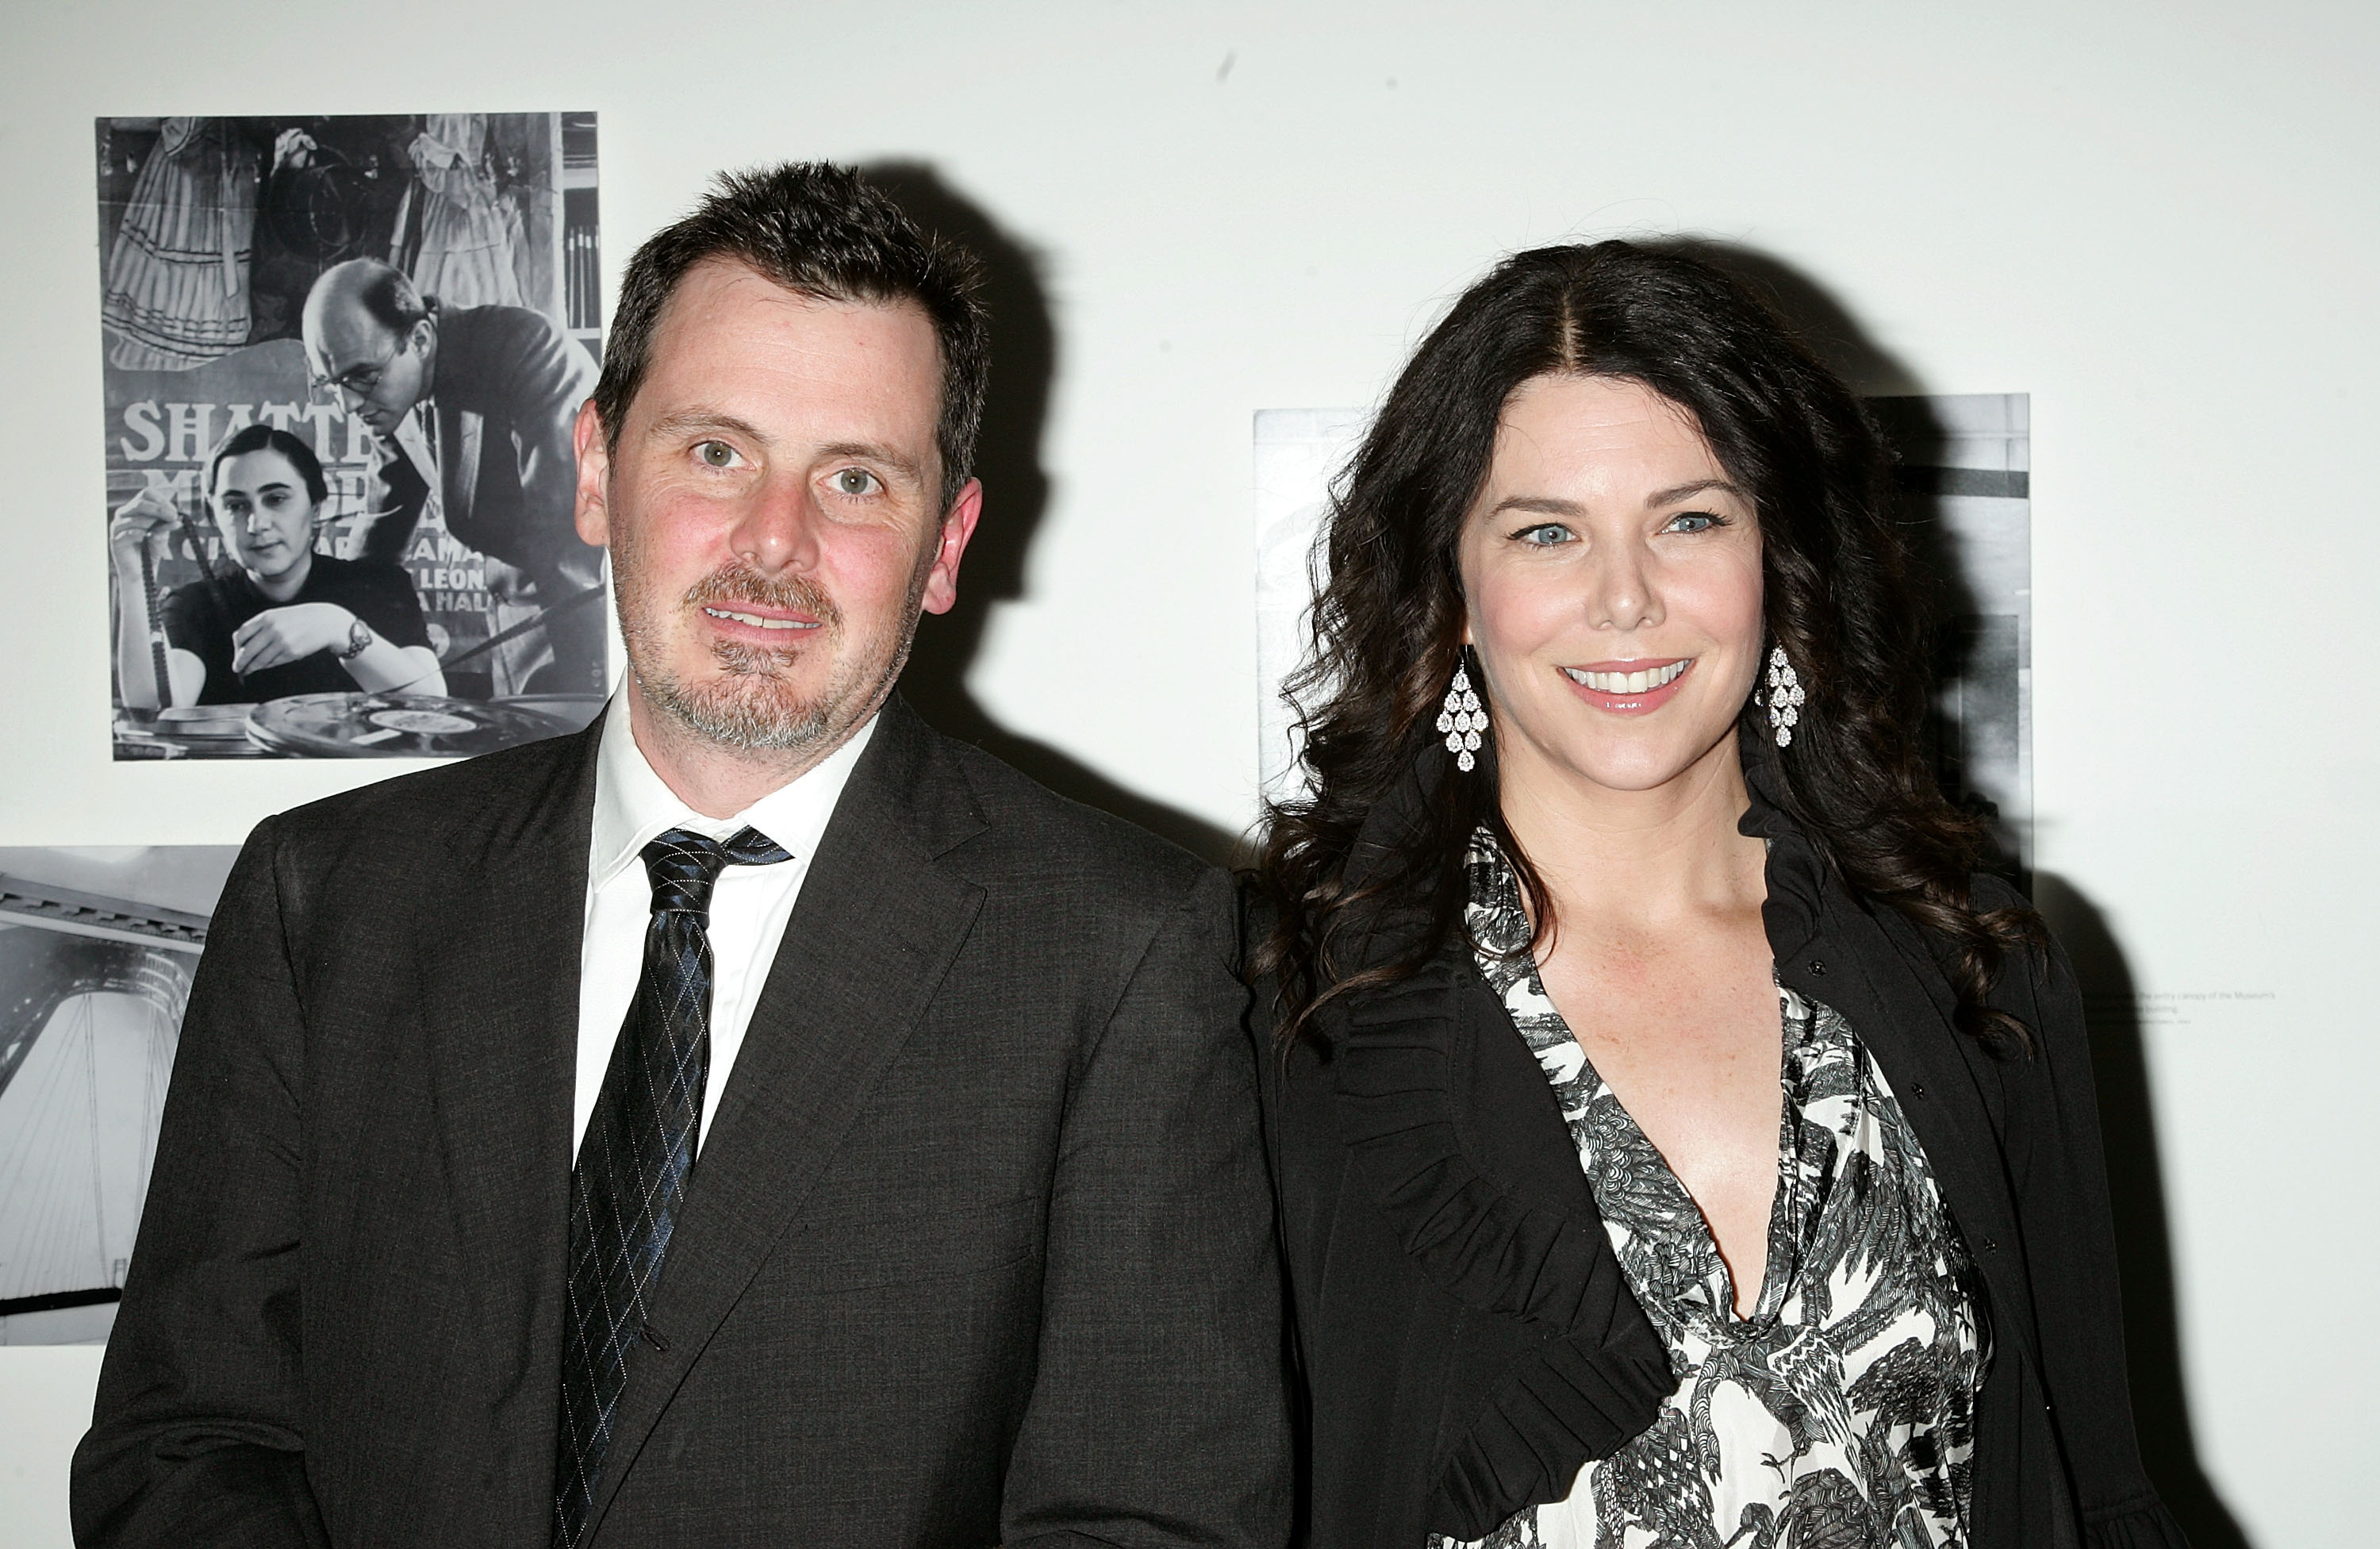 Chris Eigeman and Lauren Graham arrive at the "Turn the River" premiere at the Museum of Modern Art